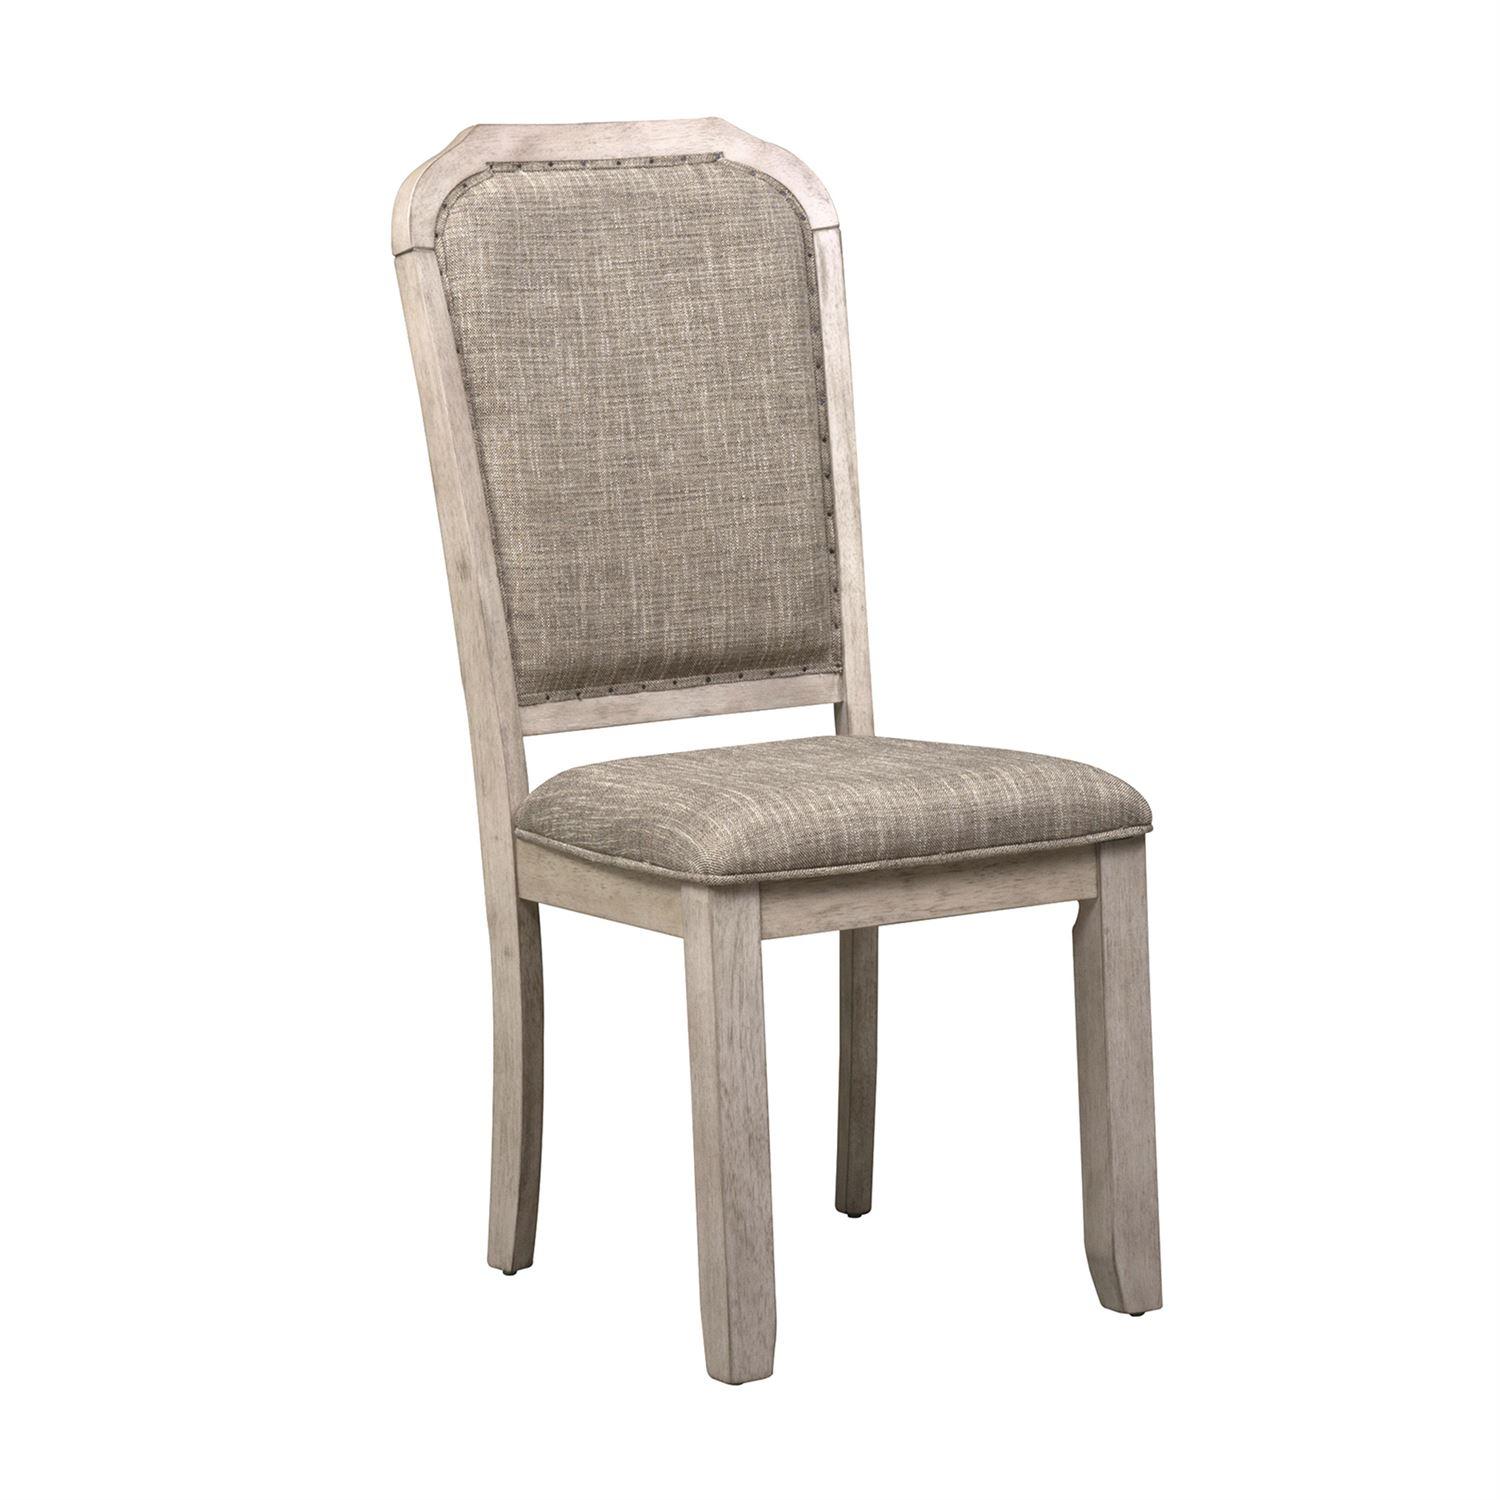 Farmhouse Dining Side Chair Willowrun  (619-DR) Dining Side Chair 619-C6501S in White 